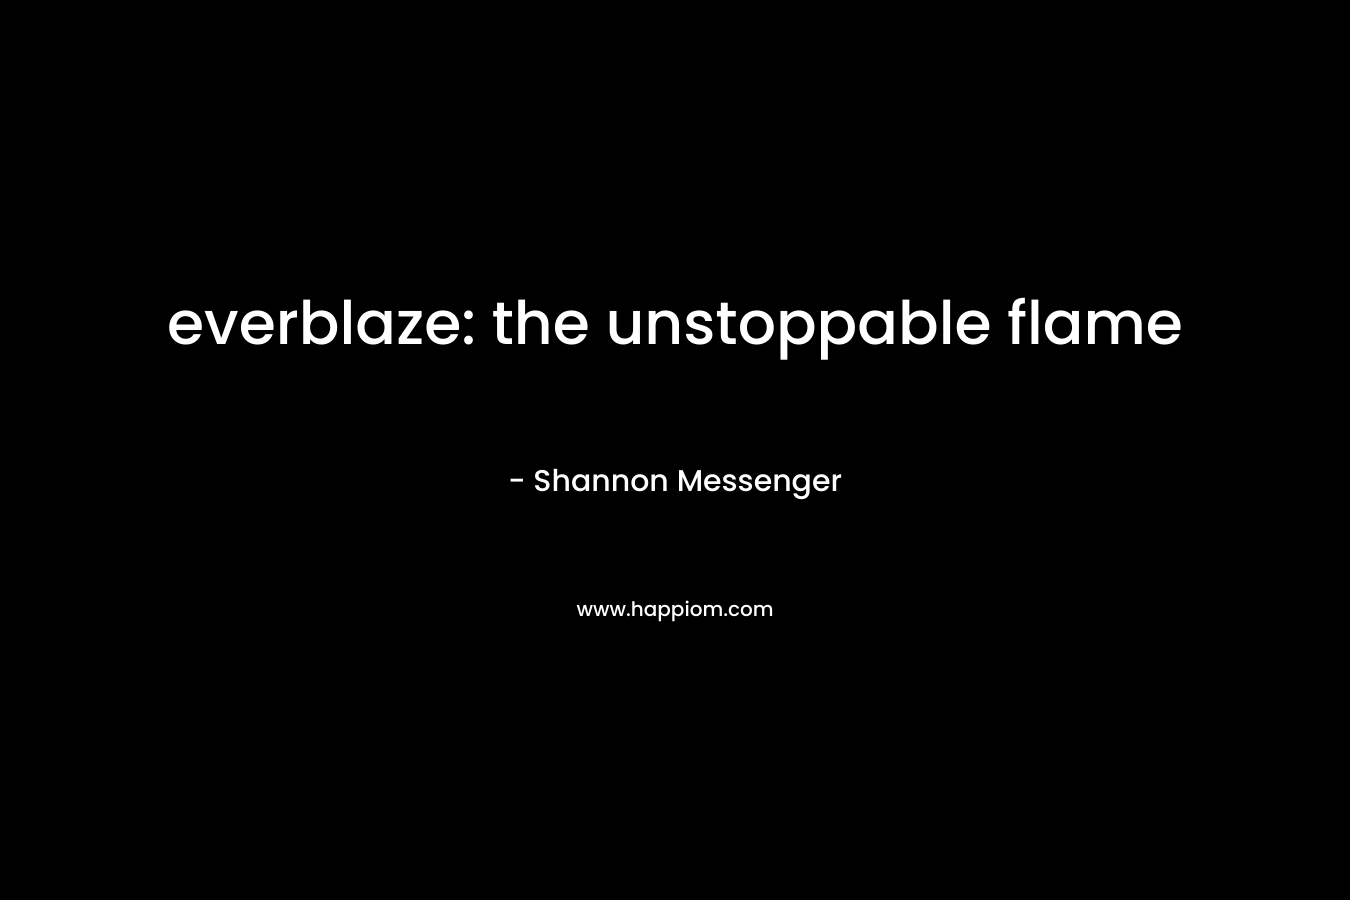 everblaze: the unstoppable flame